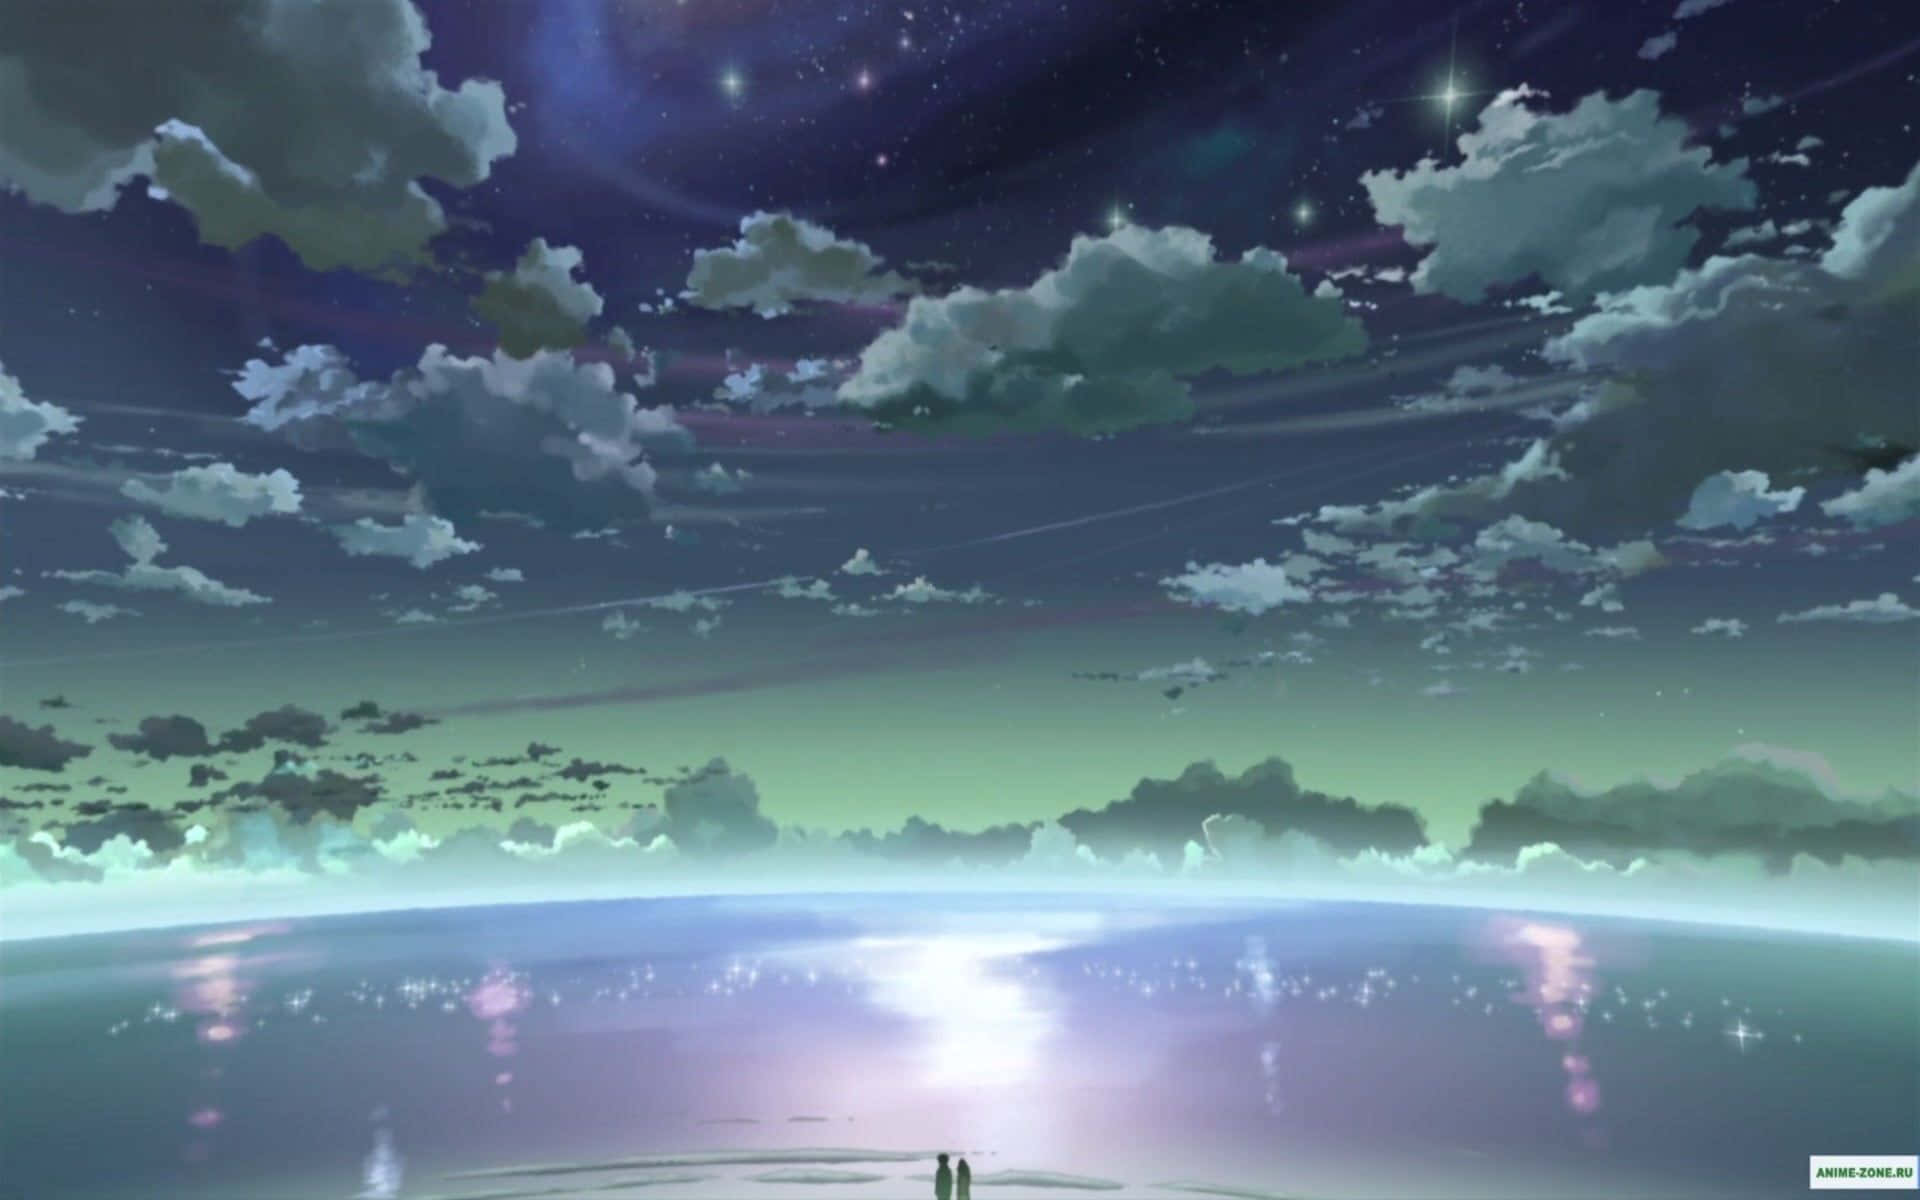 Love's Journey, from 5 Centimeters Per Second